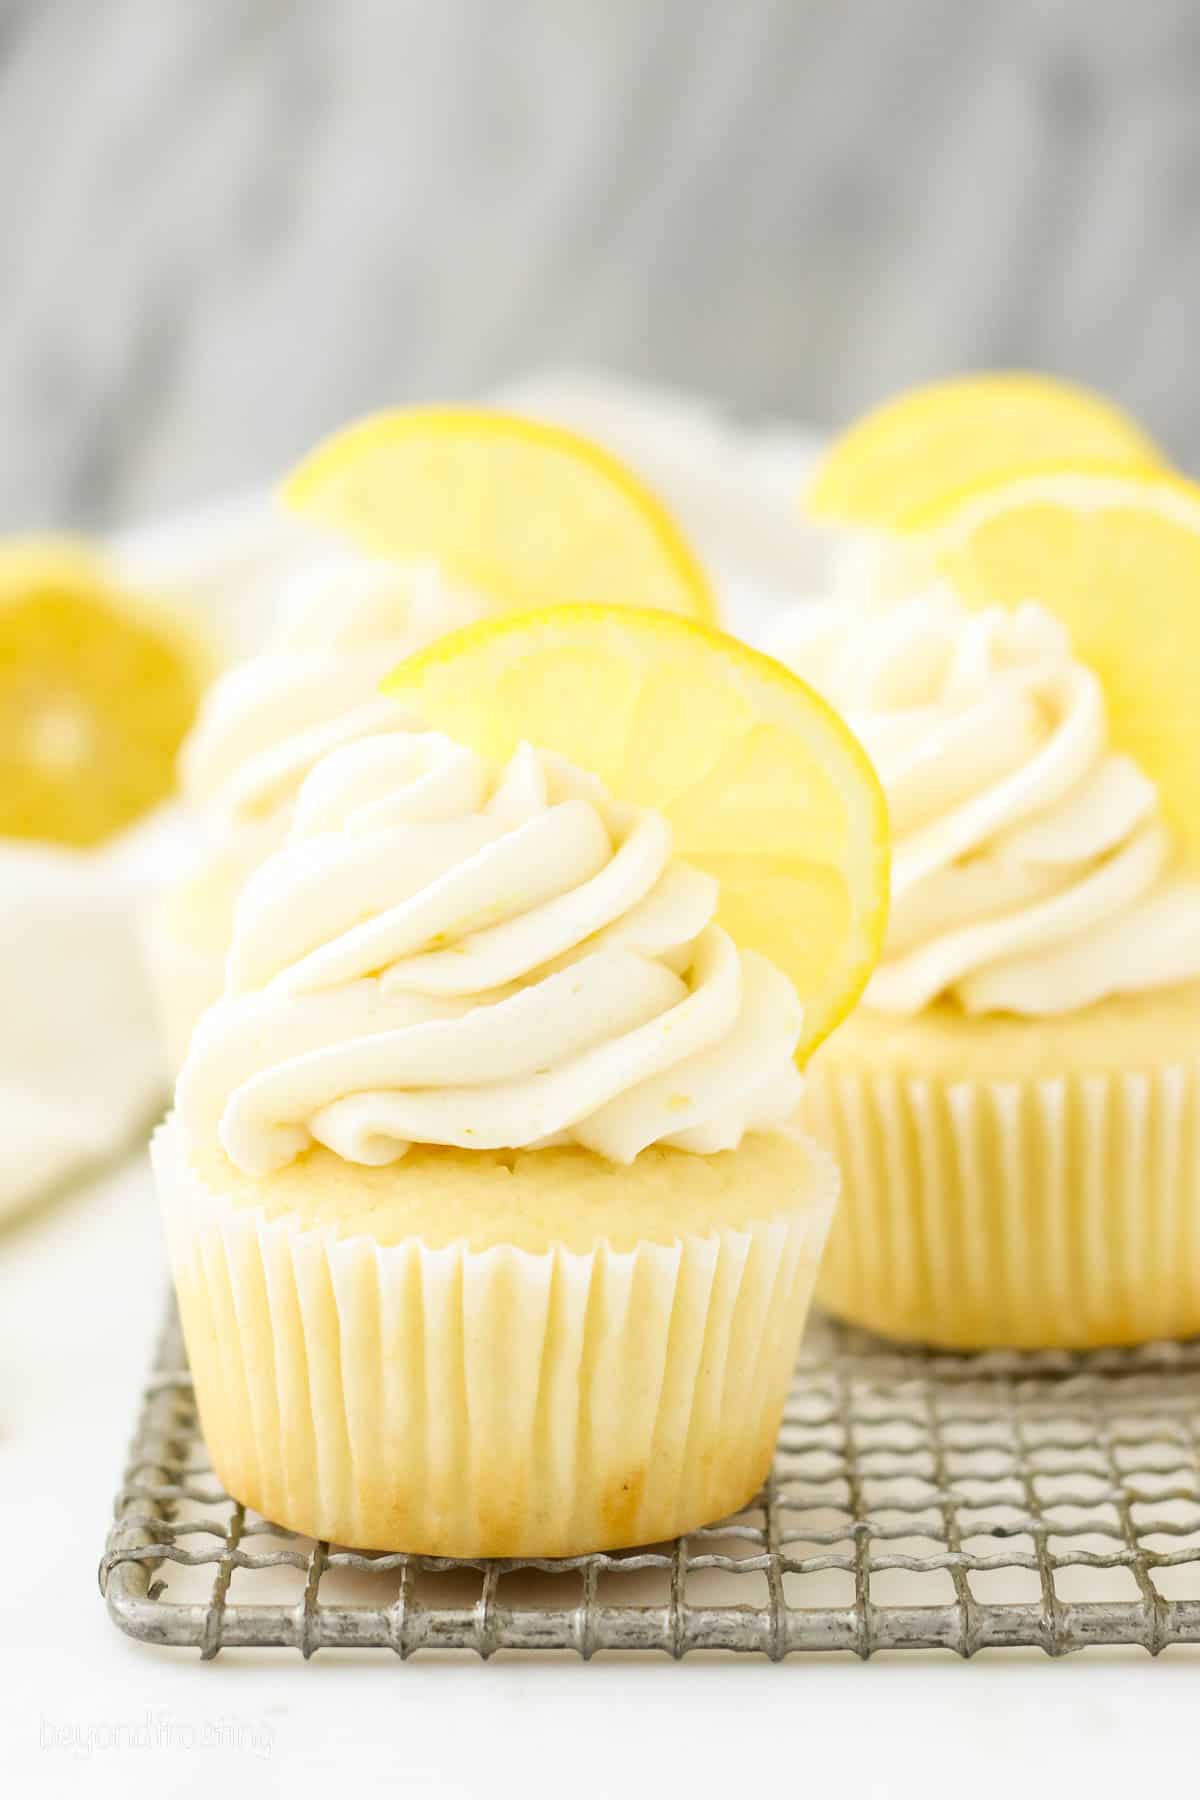 Frosted lemon cupcakes topped with lemon wedges.